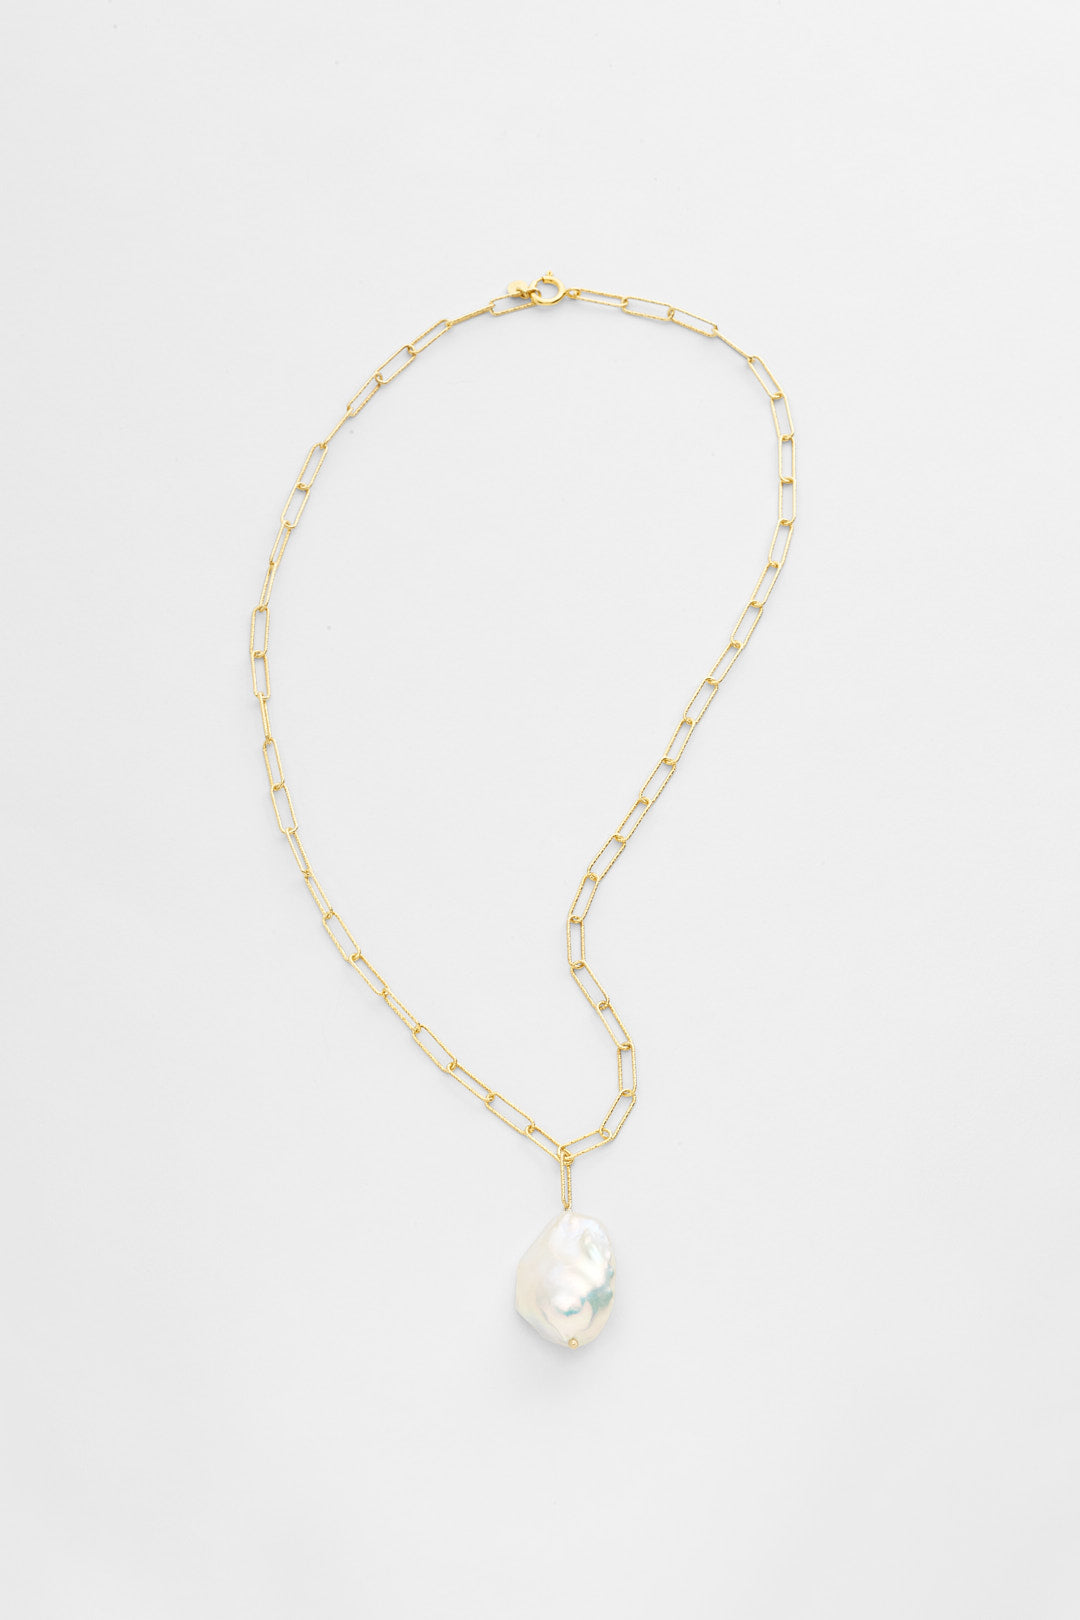 Hilda Paperclip Necklace with pearl pendant